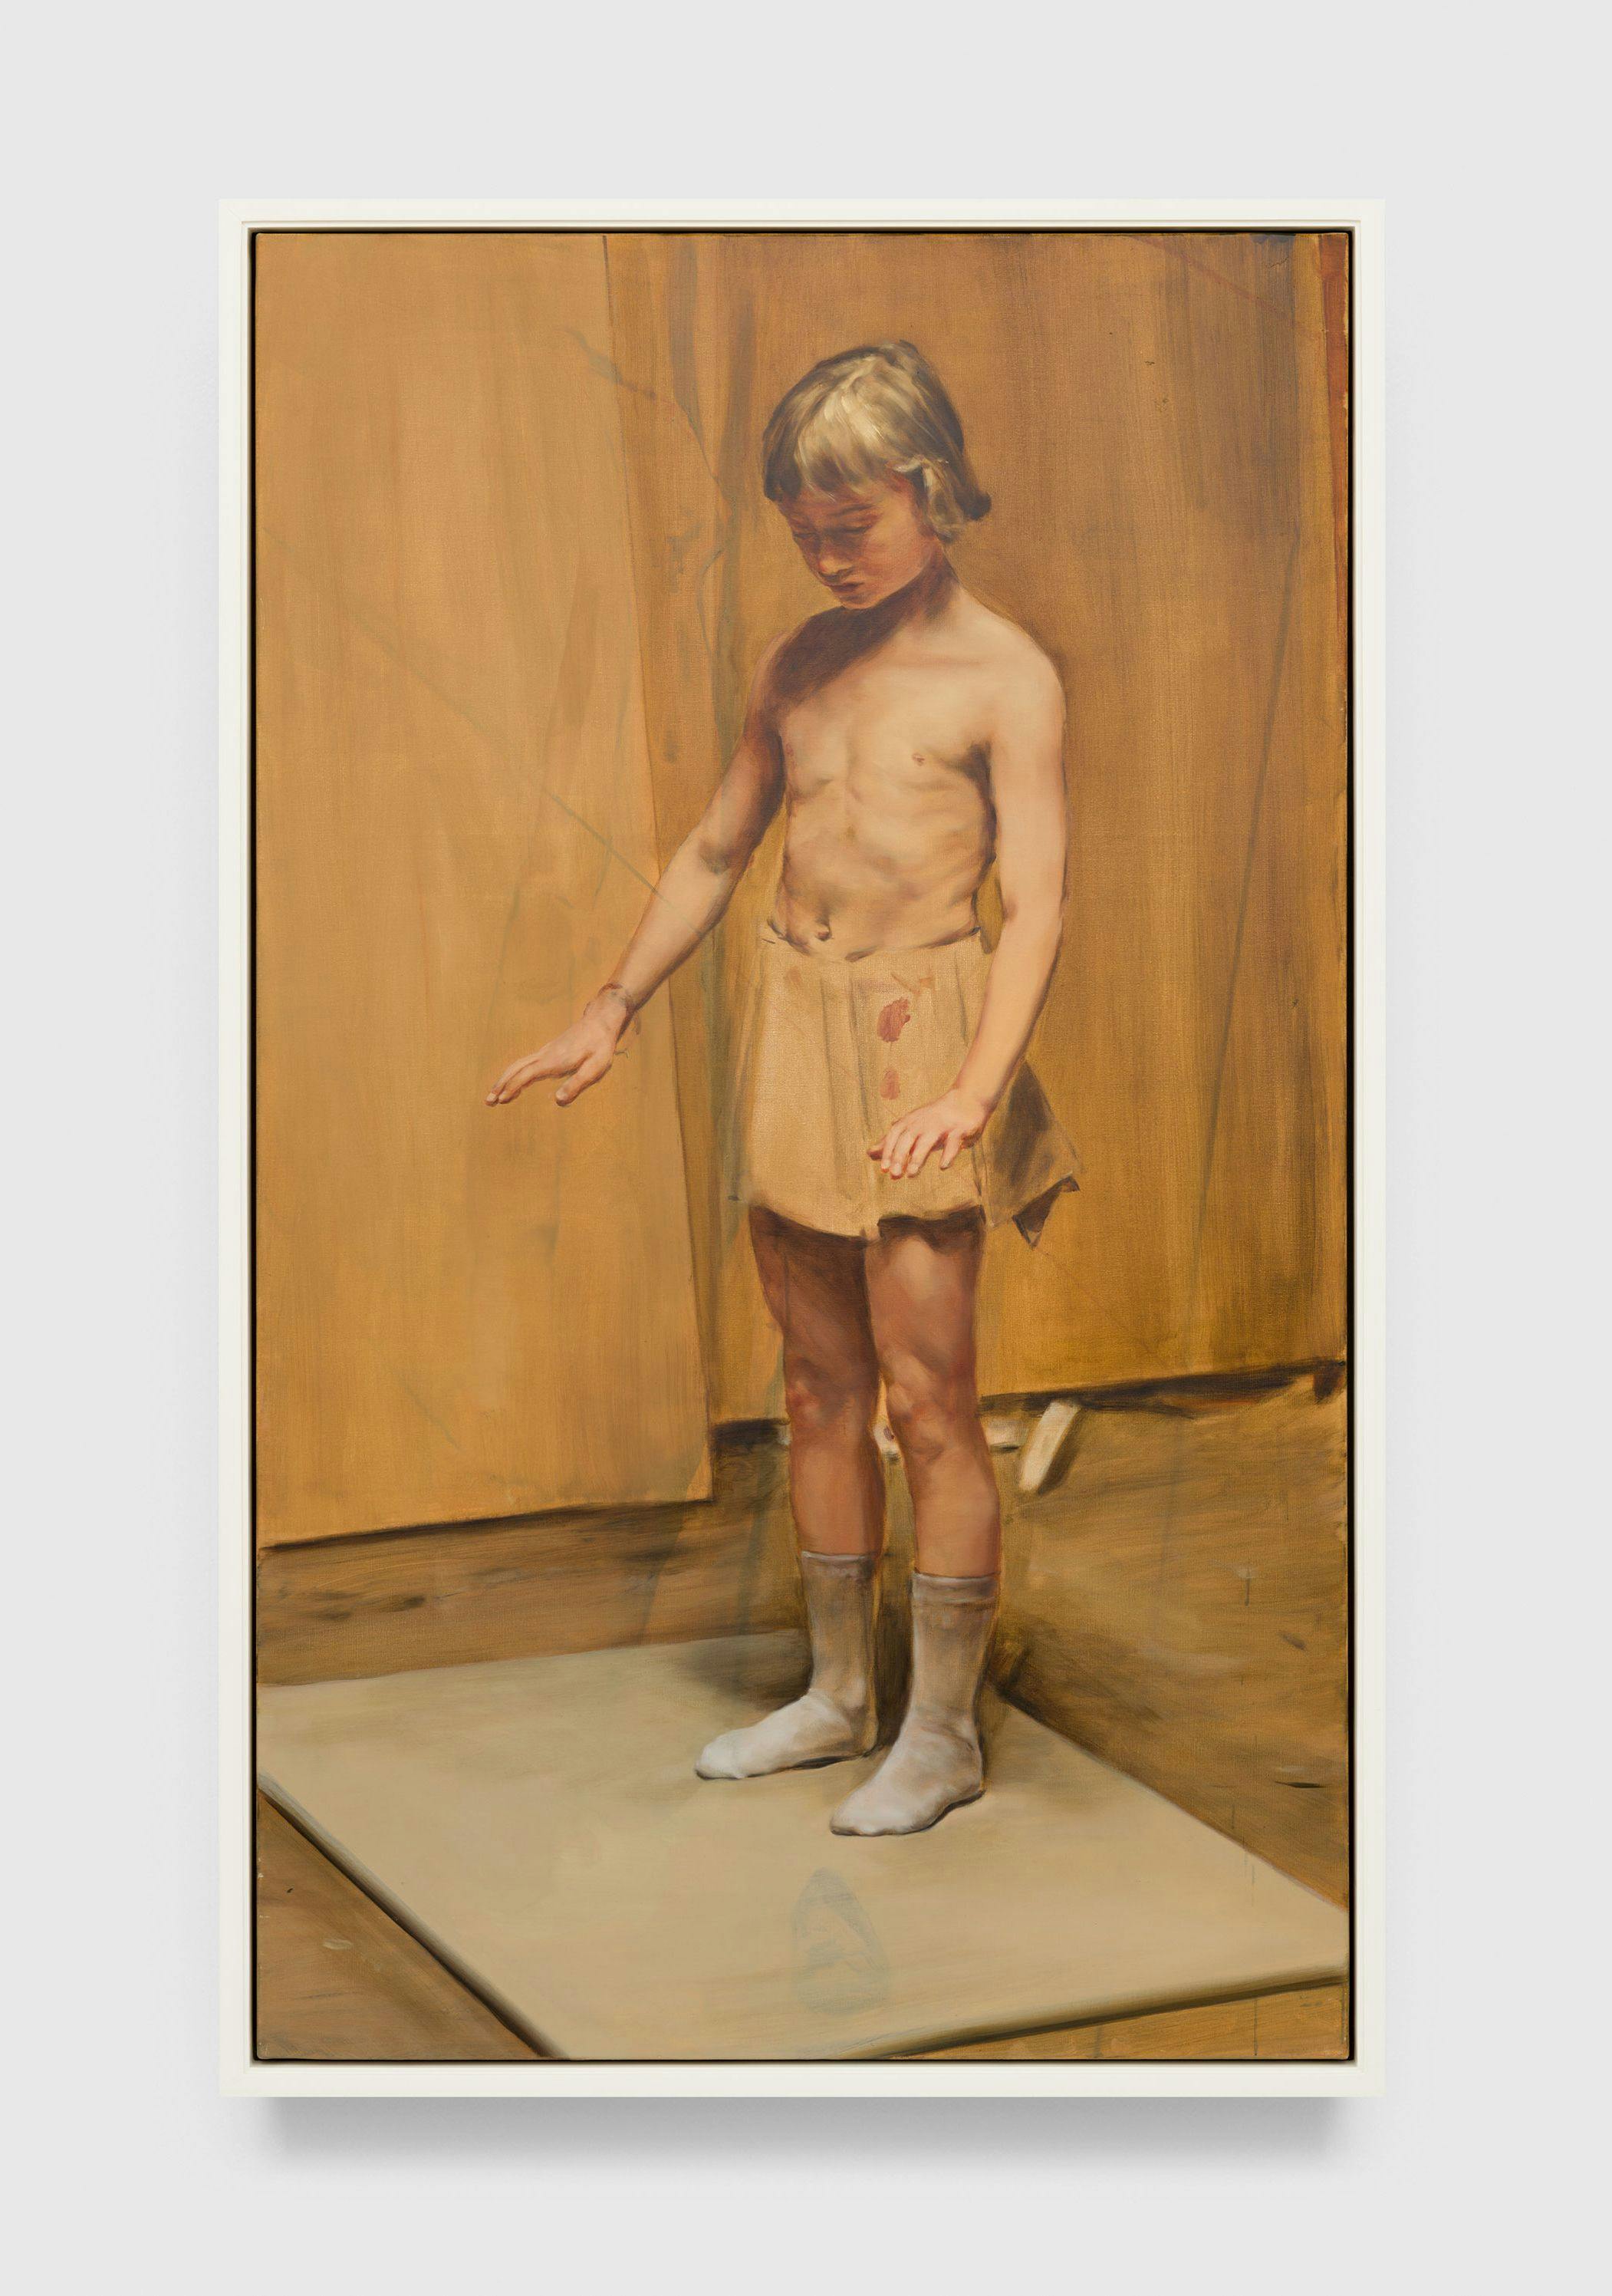 A painting by Michaël Borremans, titled The Wooden Skirt, dated 2011.